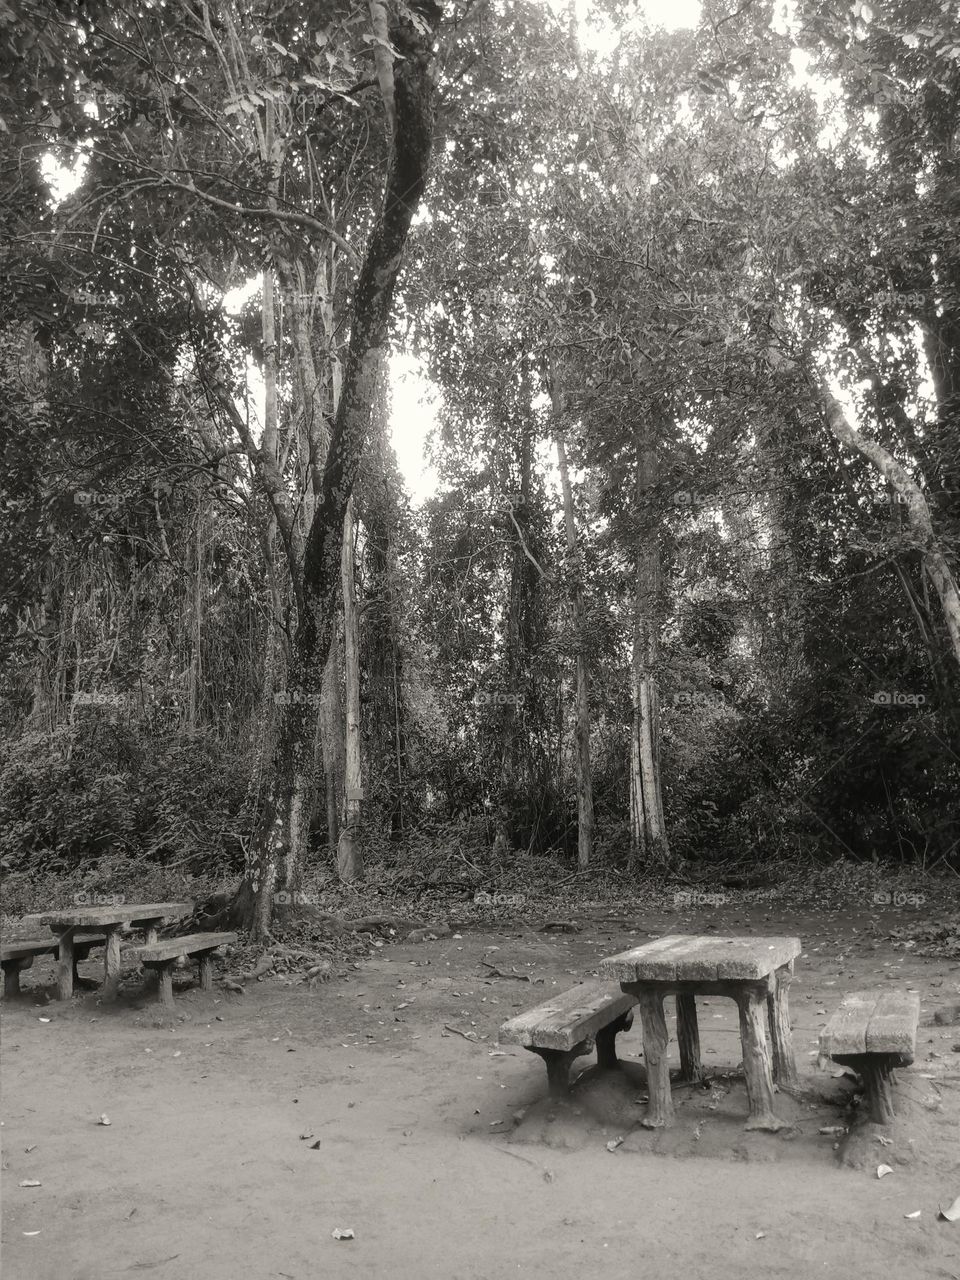 A picnic place in the woods